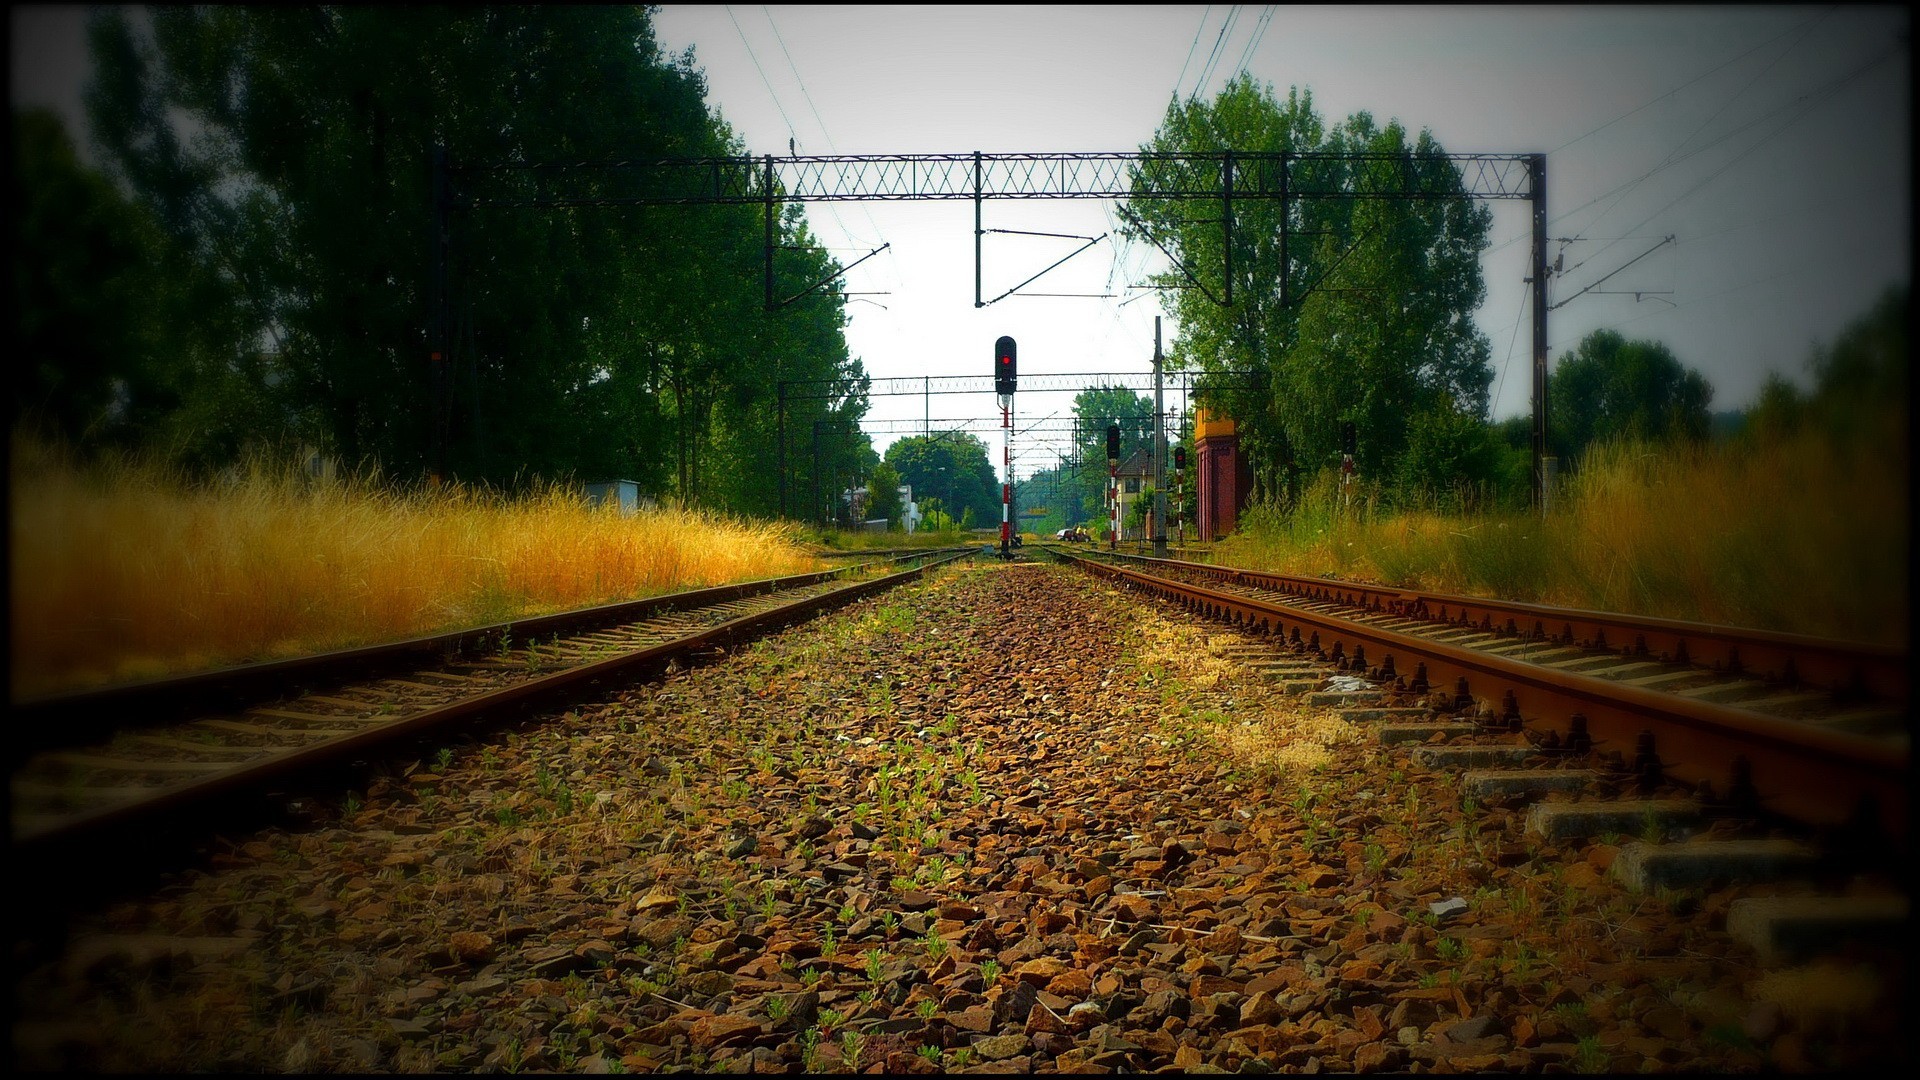 General 1920x1080 railway traffic lights perspective trees